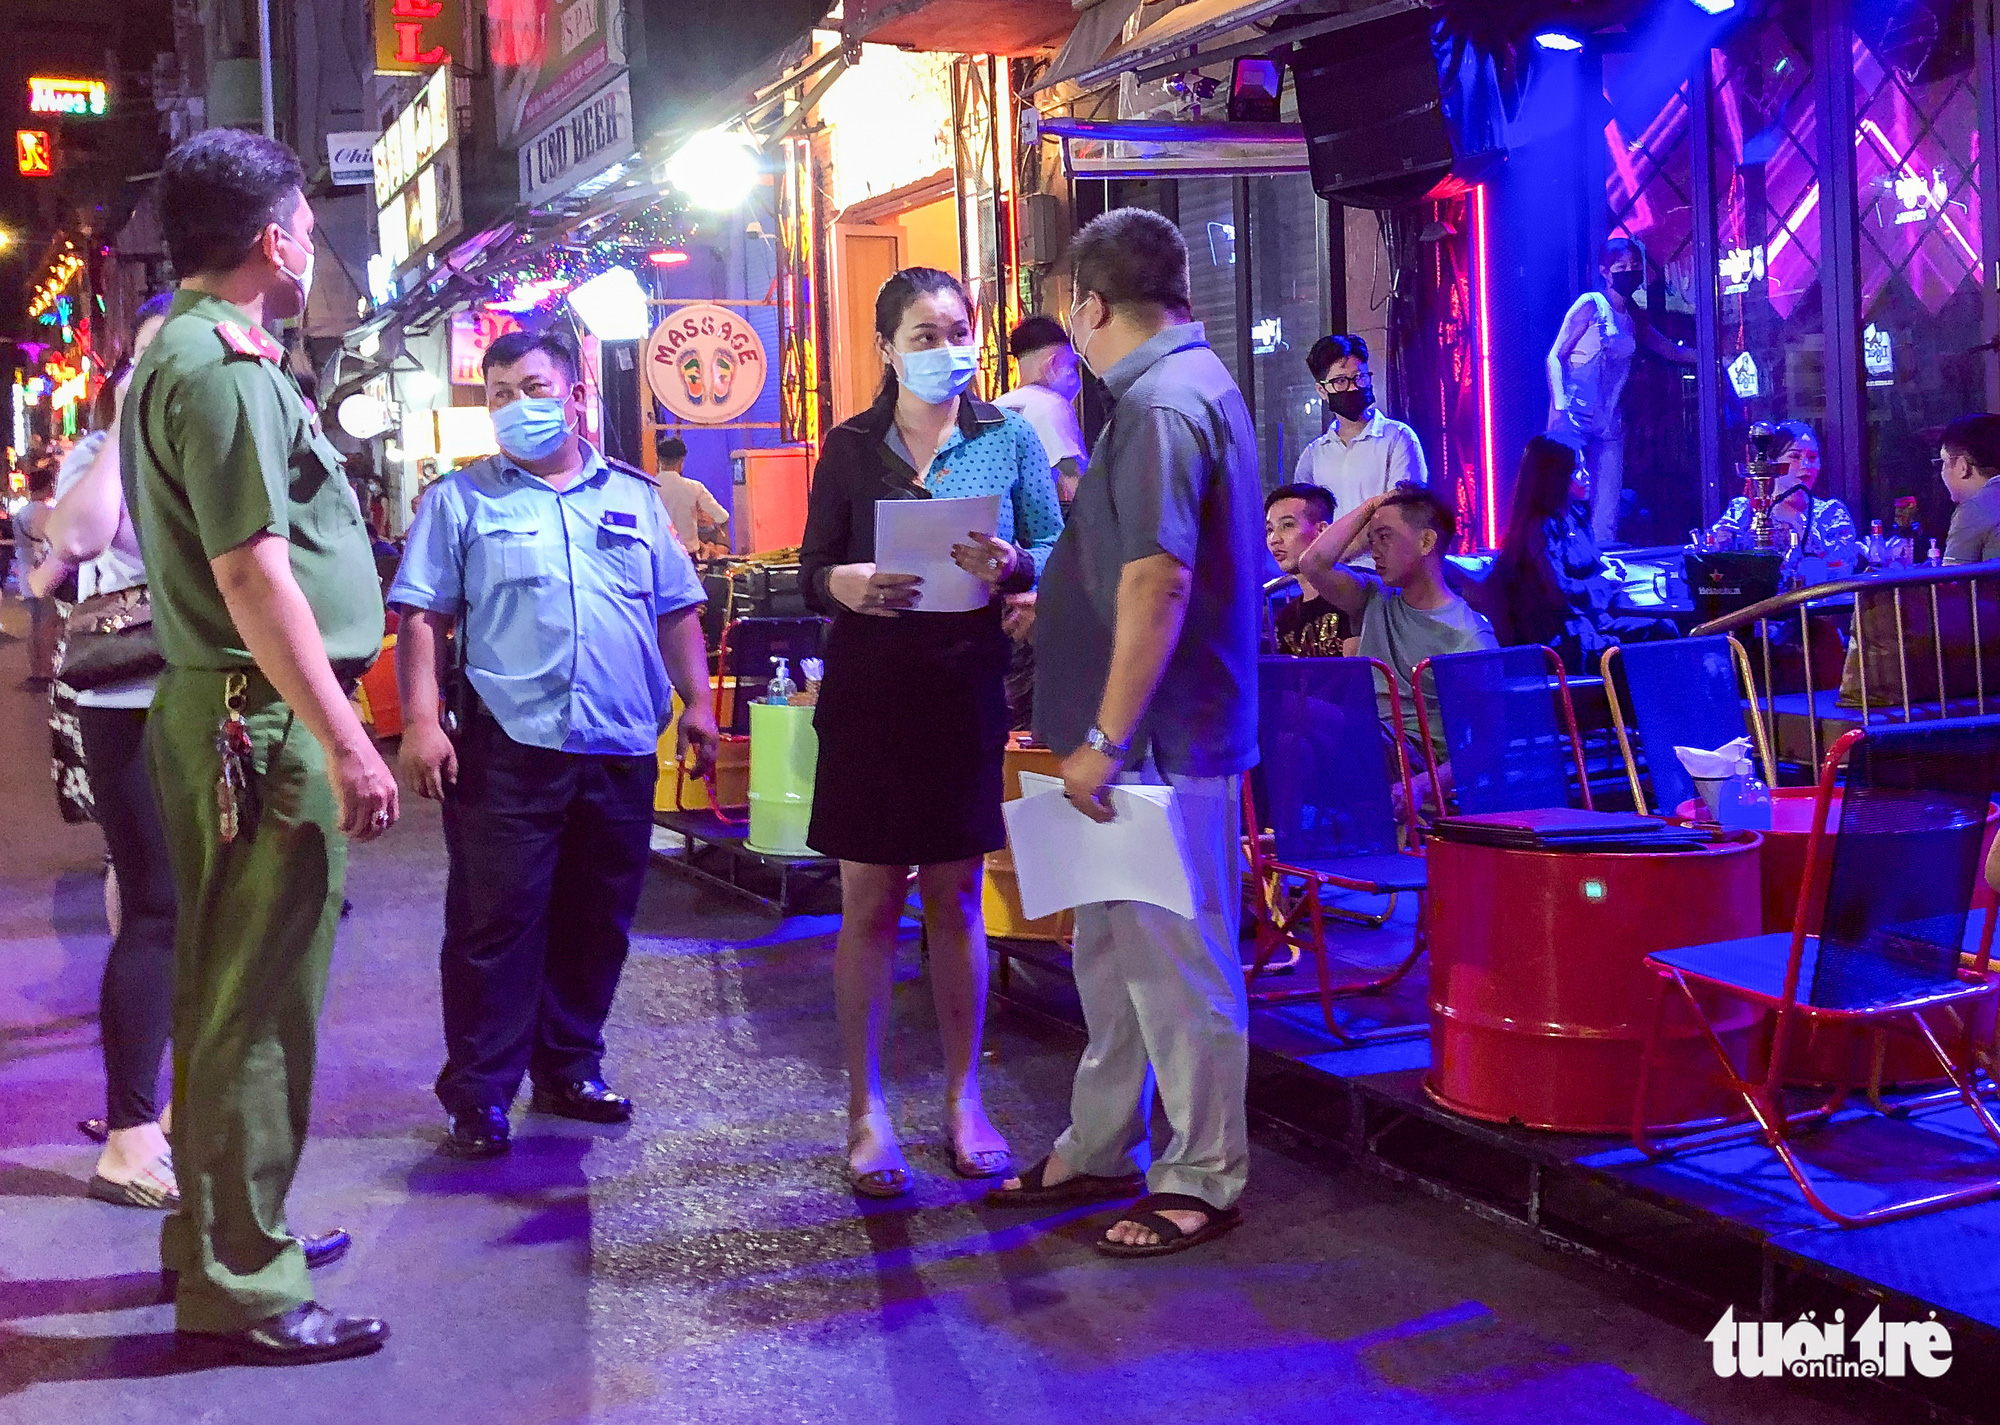 An official explains to a store owner the terms of a noise-reducing commitment during an inspection of businesses on Bui Vien Street in Ho Chi Minh City, Vietnam, March 20, 2021. Photo: Chau Tuan / Tuoi Tre